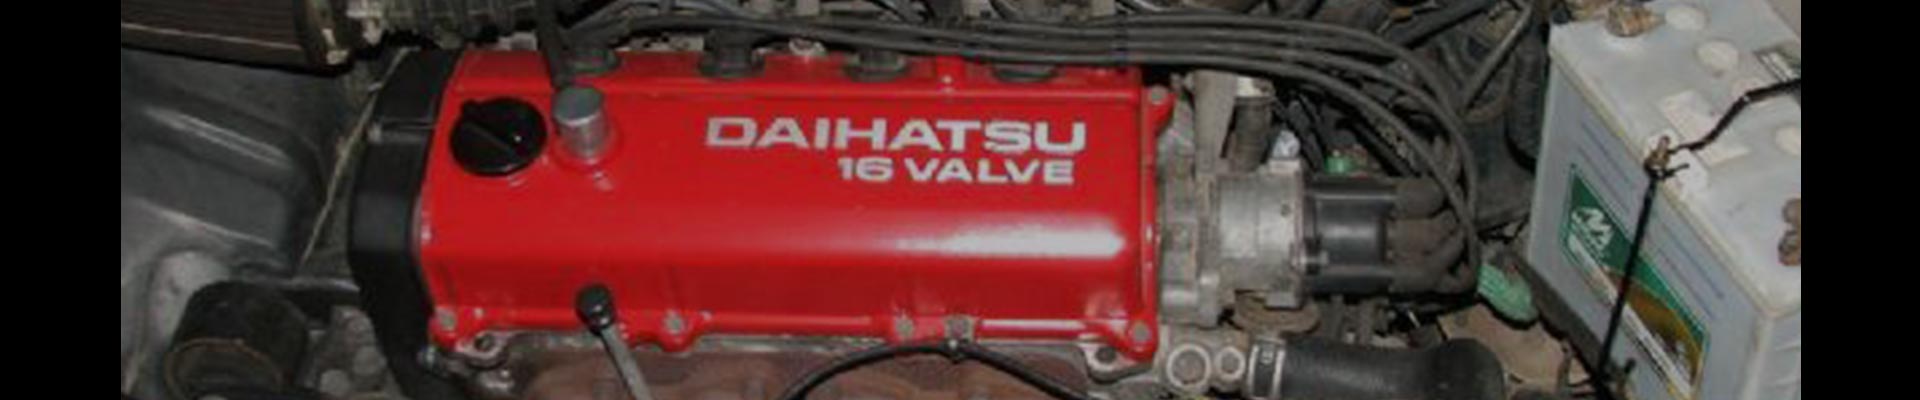 Shop Replacement 1992 Daihatsu Rocky Parts with Discounted Price on the Net